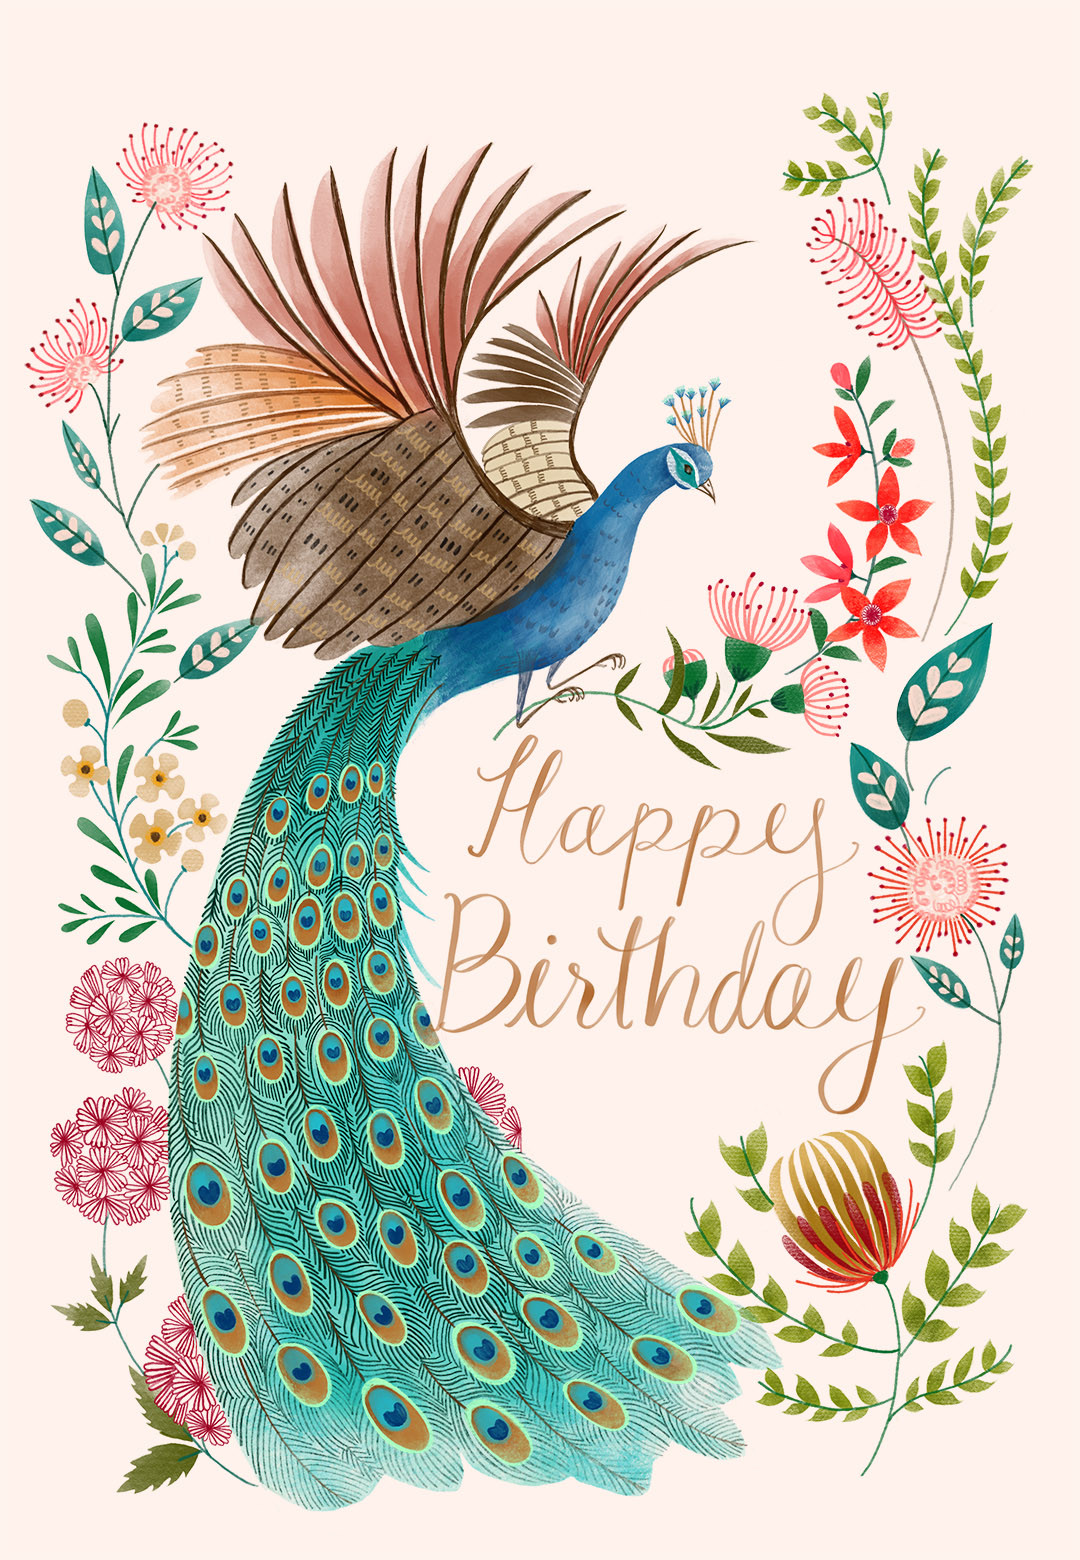 Pictures Of Birthday Cards
 Peacock & flowers Birthday Card free